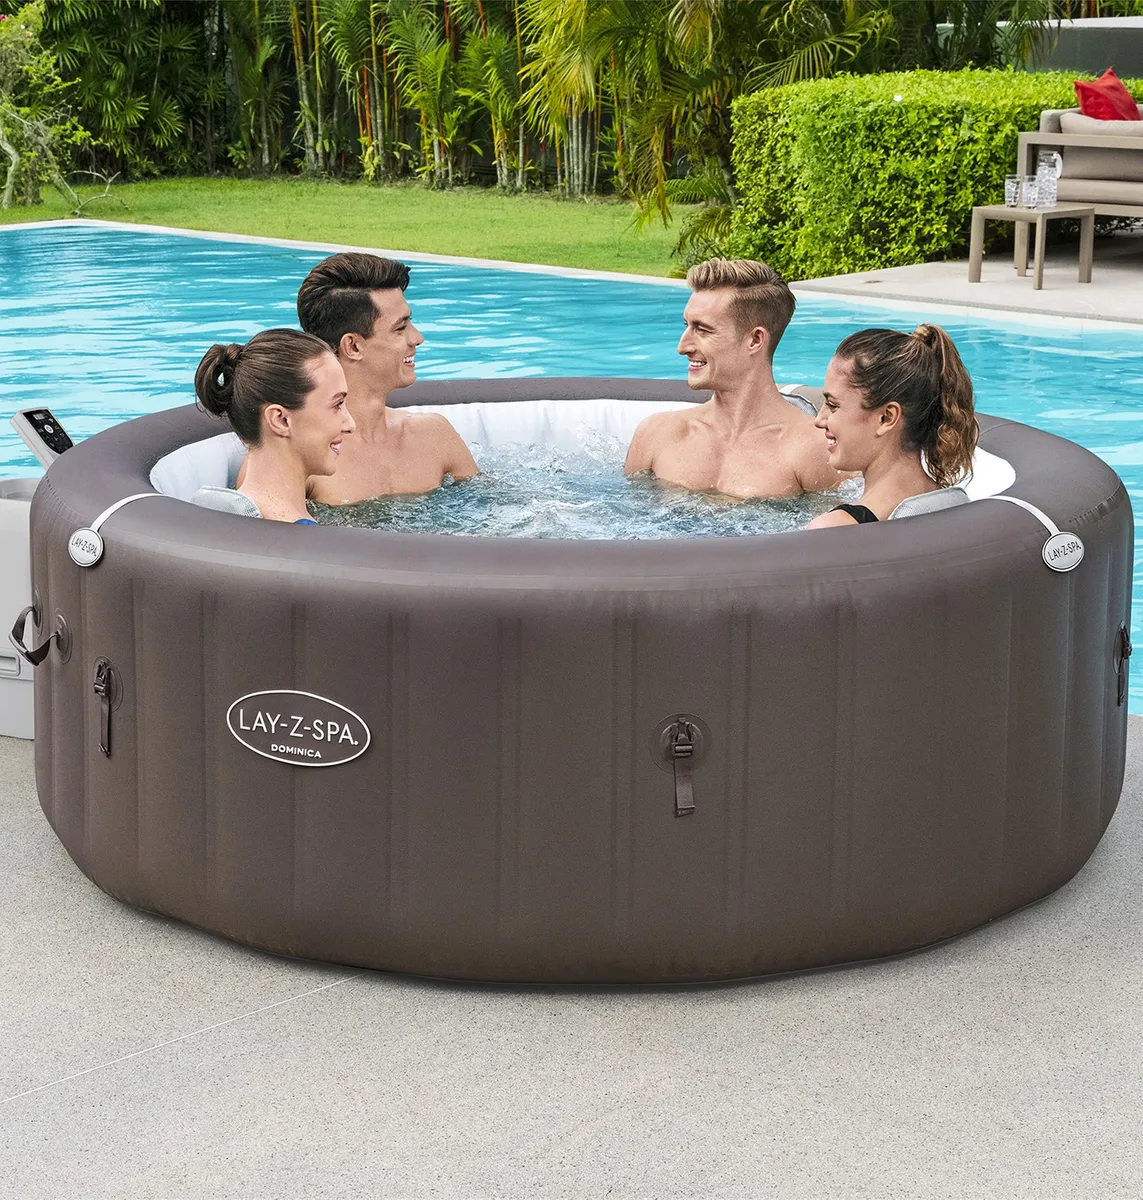 SPA GONFLABLE BESTWAY LAY-Z-SPA DOMINICA HYDROJET 4-6 pers